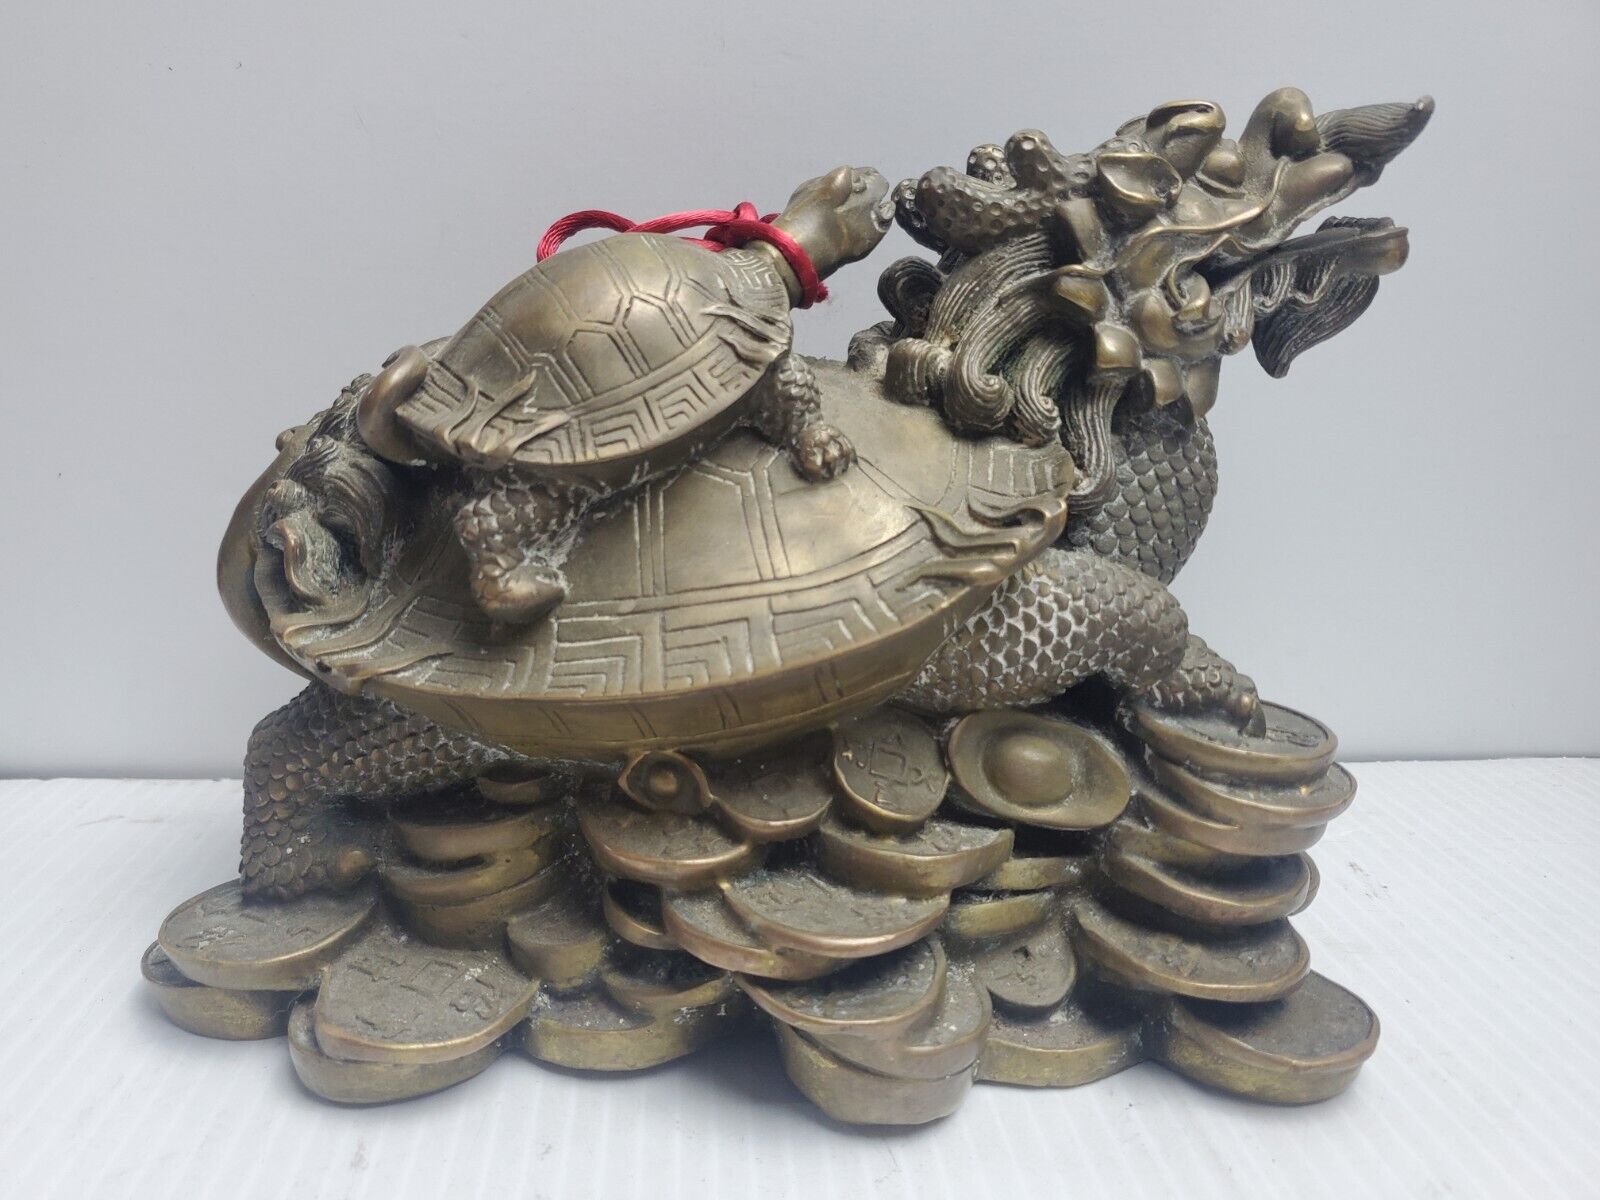 lucky Chinese handwork Bronze Fengshui Dragon Turtle Statue Coin Pile